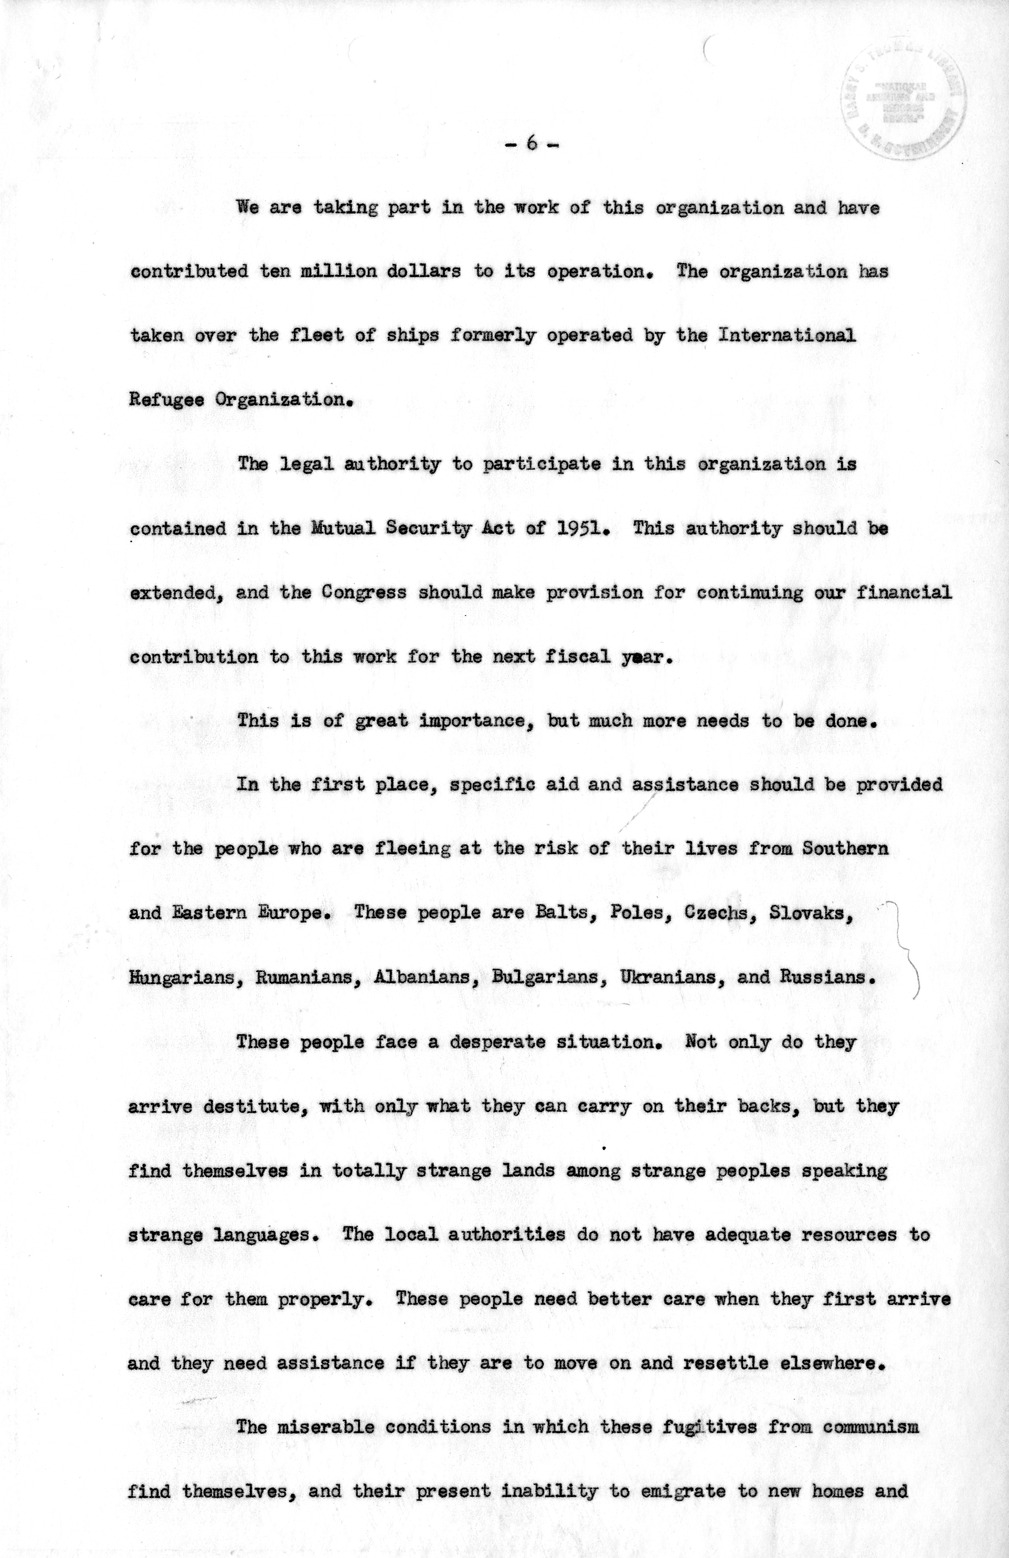 Memorandum from Richard Neustadt To Roger Jones with Attached Draft of Special Message to Congress